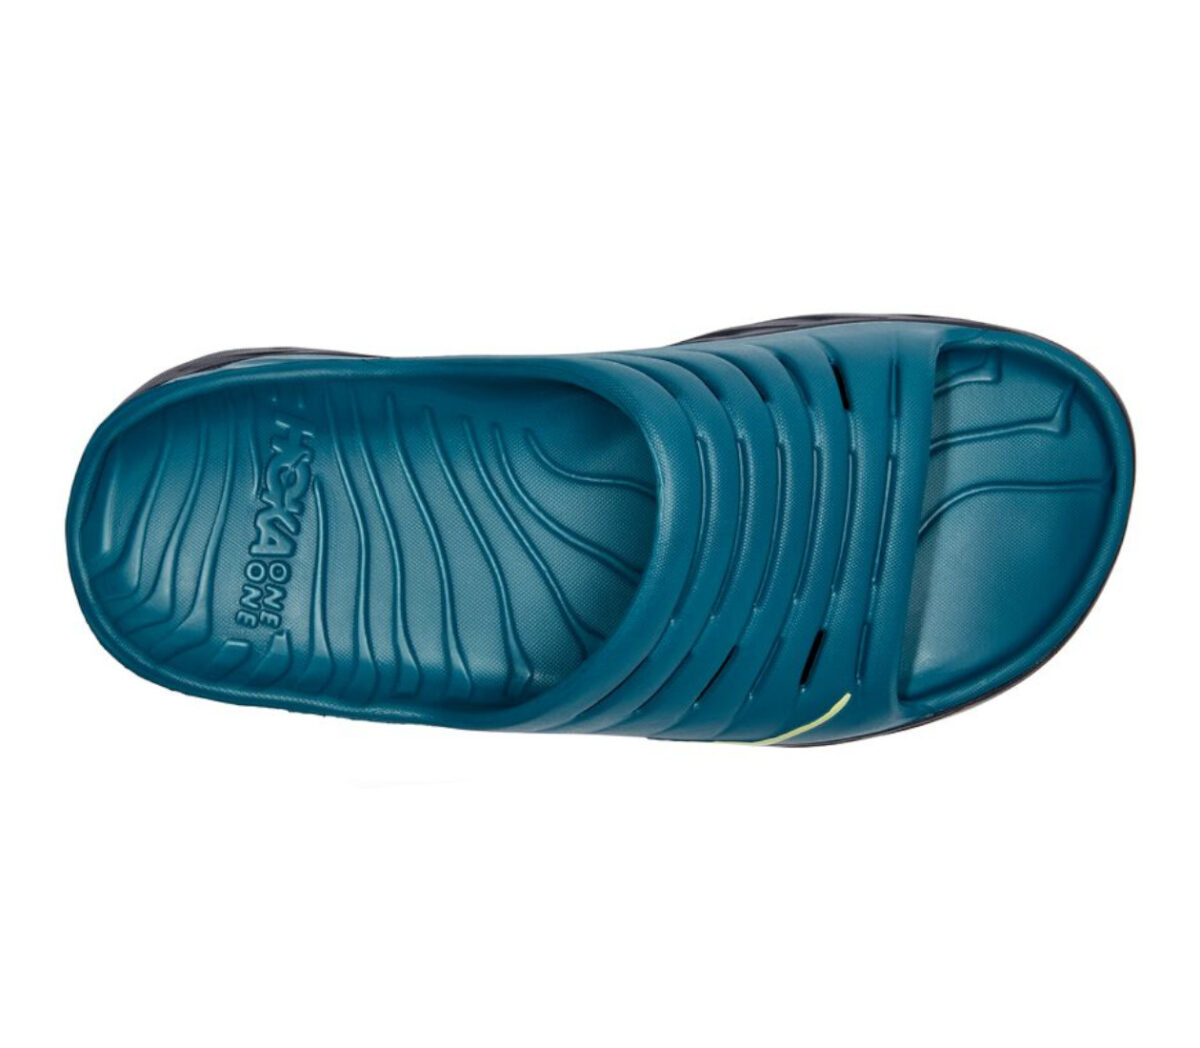 Tomaia Scarpa hoka one one ora recovery slide 2 uomo BLUE CORAL / BUTTERFLY